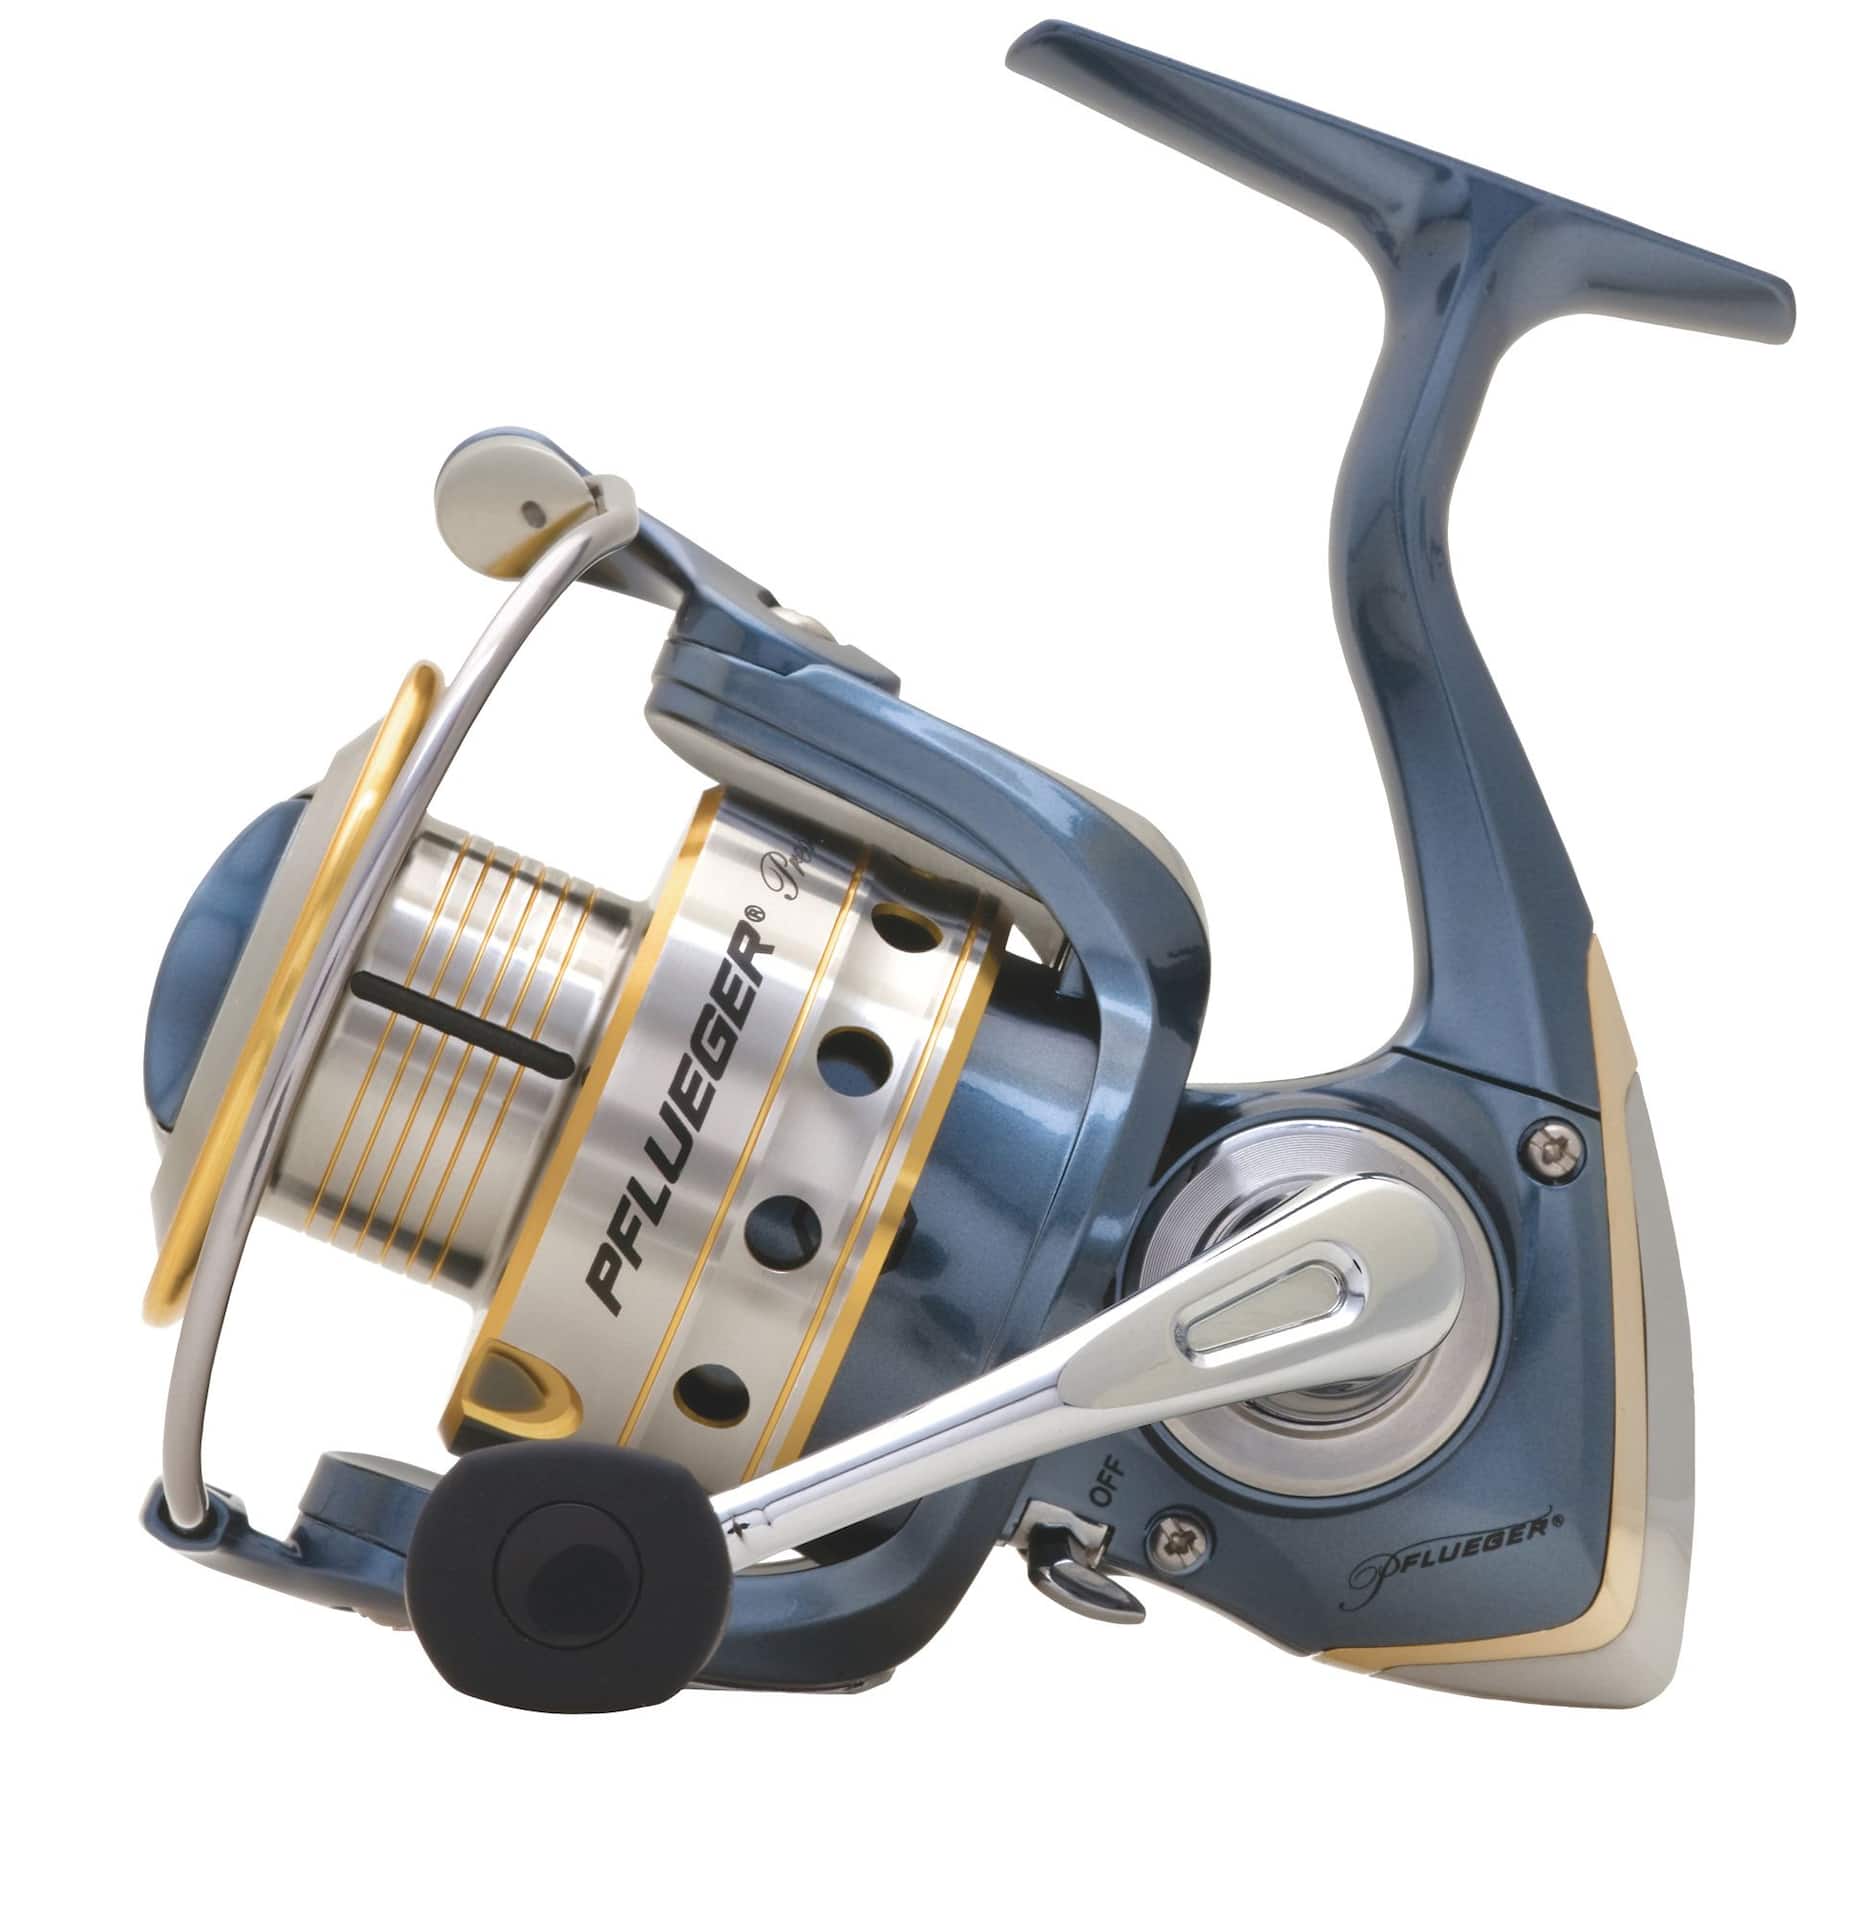 https://media-www.canadiantire.ca/product/playing/fishing/fishing-equipment/0783811/pflueger-president-6735-reel-size-35-3355bf6a-11b5-4e1a-aa38-fadc4c220ee8-jpgrendition.jpg